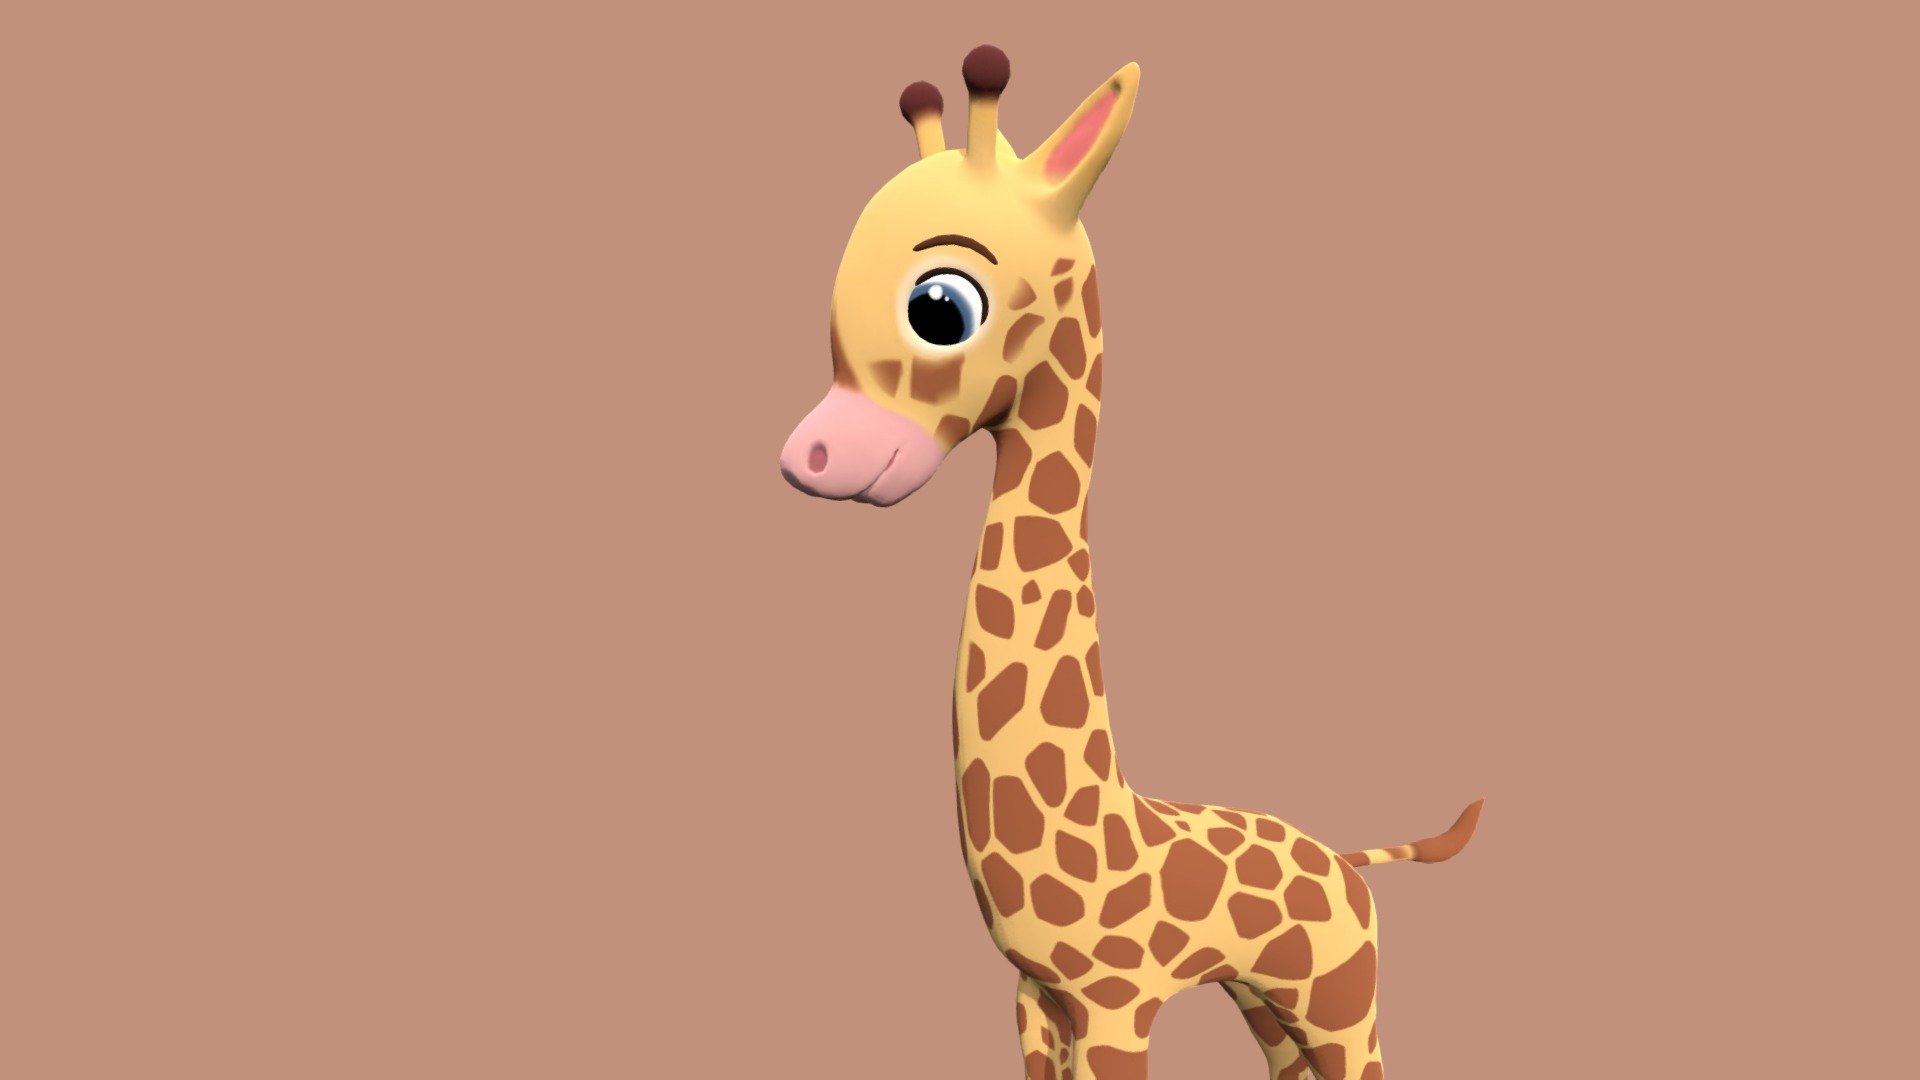 Meet the delightful 3D Stylized Cute Toon Giraffe - the lovable character that will elevate your digital projects to new heights! Designed with all quad topology and a low poly count, this giraffe model is game-ready and subdivision-friendly. With its fully rigged structure, it effortlessly adds life and personality to any scene. Embark on a captivating journey filled with imagination and fun as you incorporate this endearing giraffe into your animations, games, or art. Don't miss the chance to bring joy and wonder to your audience - grab this adorable giraffe model now! - Stylized Toon Giraffe (rigged) - Buy Royalty Free 3D model by ahingel 3d model